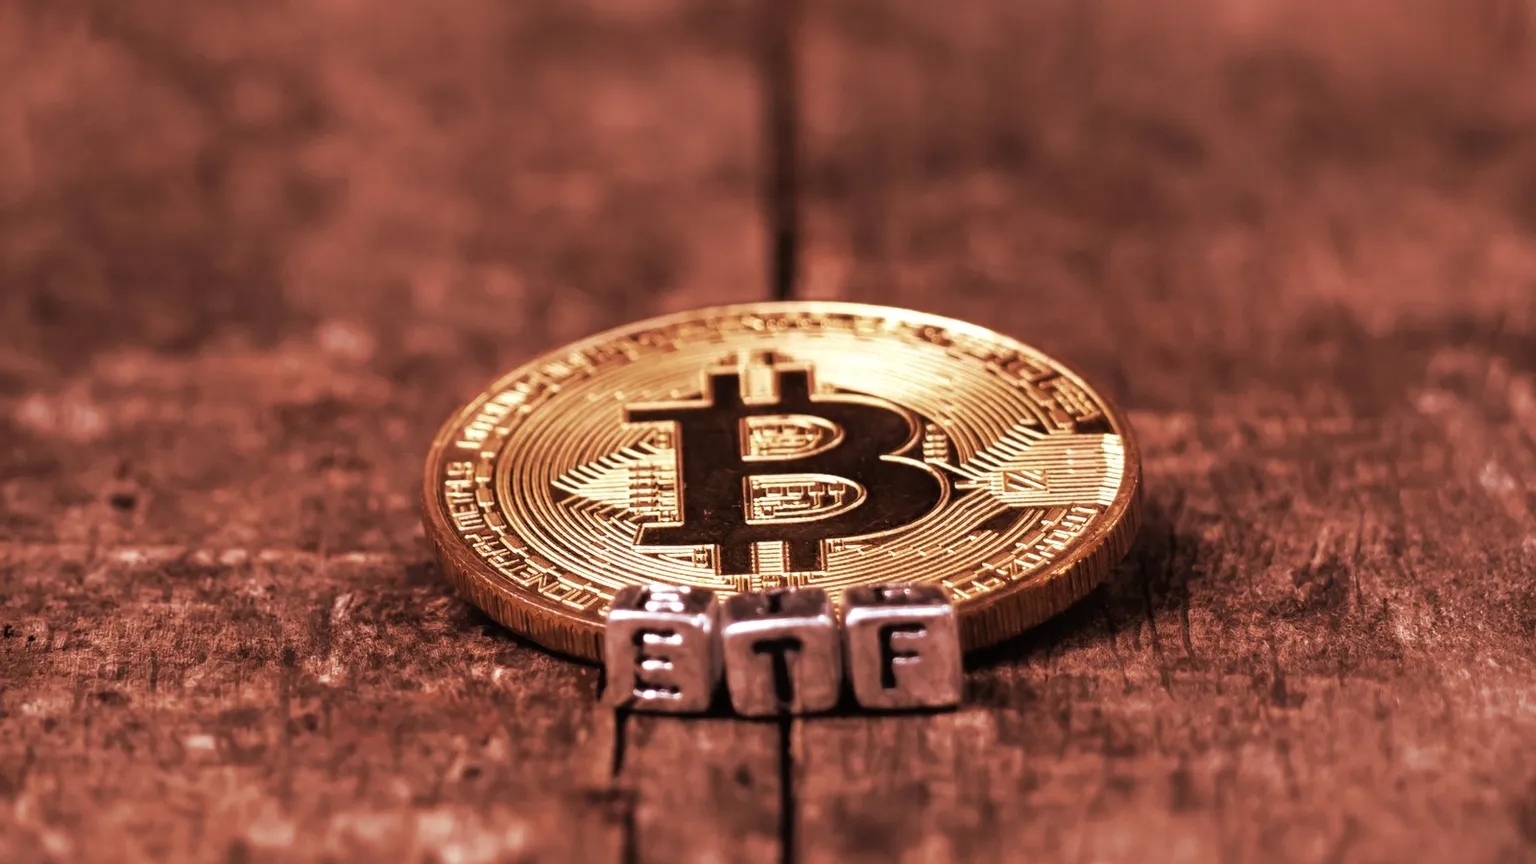 Another Bitcoin ETF Application. Image: Shutterstock